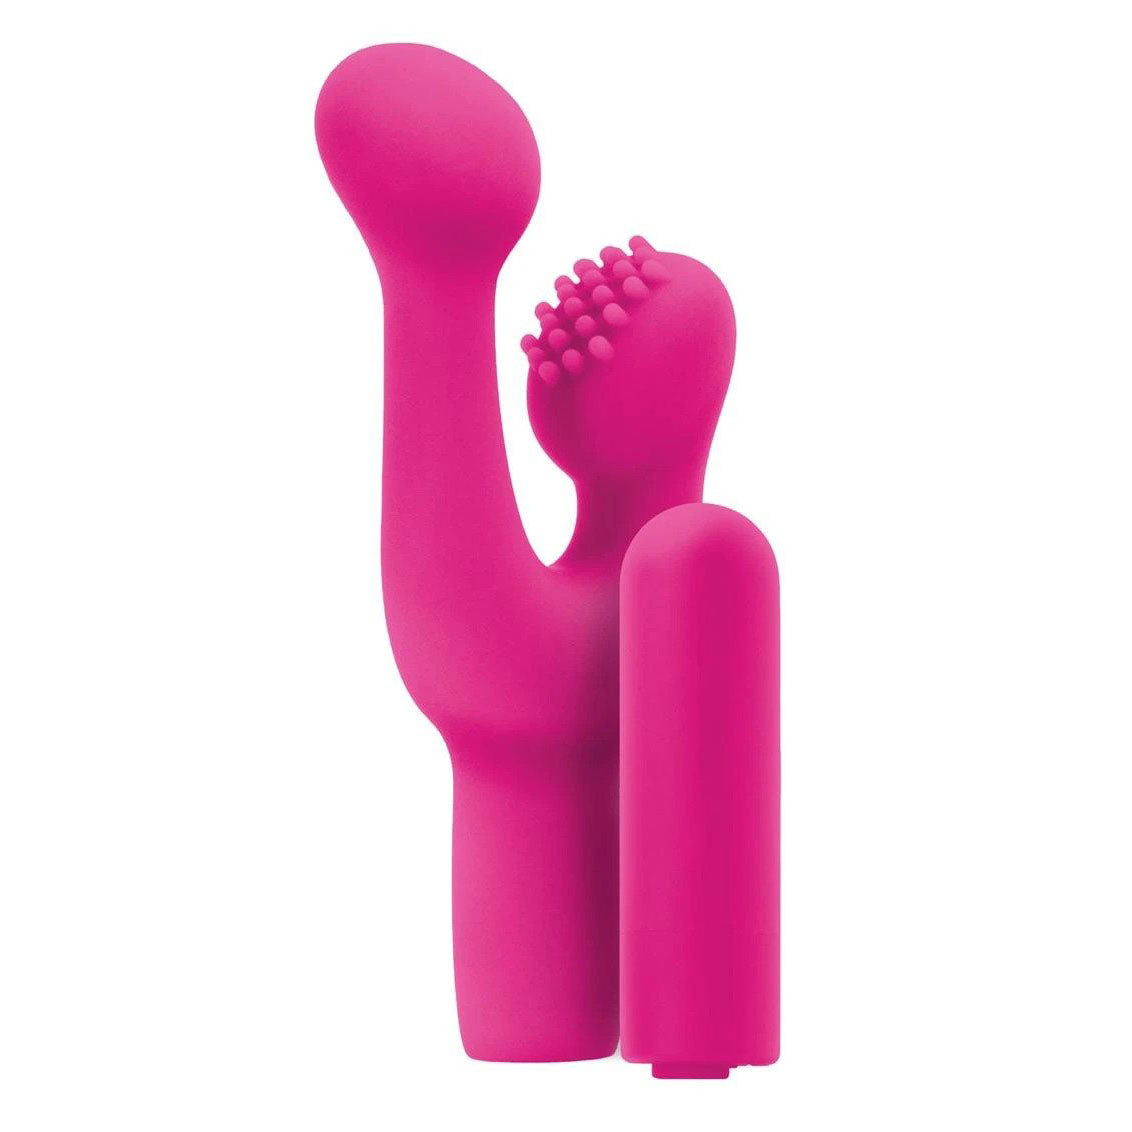 INYA Pink Finger Fun Rechargeable Clitoral Stimulator > Sex Toys For Ladies > Clitoral Vibrators and Stimulators 5 Inches, Clitoral Vibrators and Stimulators, Female, NEWLY-IMPORTED, Silicone